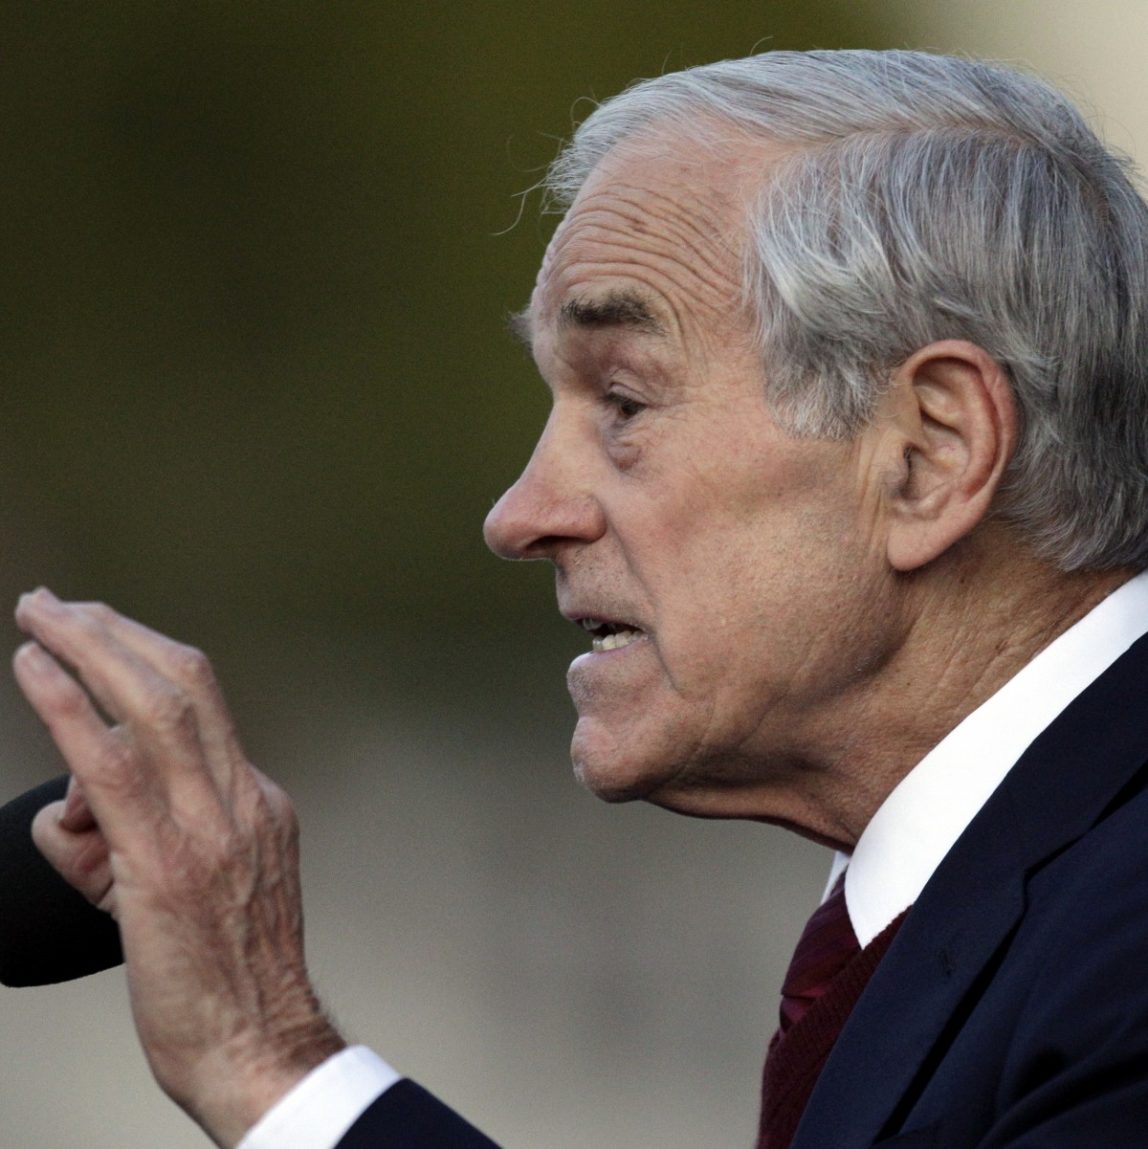 FILE - In this April 5, 2012, file photo, Republican presidential candidate Rep. RonÂ Paul, R-Texas, gestures while speaking at the University of California at Berkeley, Calif. Some of Mitt Romneyâs former foes have yet to endorse him as the Republicansâ presidential nominee. The congressman from Texas is still in the race and hasnât yet recognized Romney as the partyâs nominee. He is pushing a libertarian message of ending the Federal Reserve, returning the countryâs currency to the gold standard and reducing the United Statesâ involvement around the globe. Romney disagrees with those positions, likely precluding an endorsement from Paul. (AP Photo/Ben Margot, File)